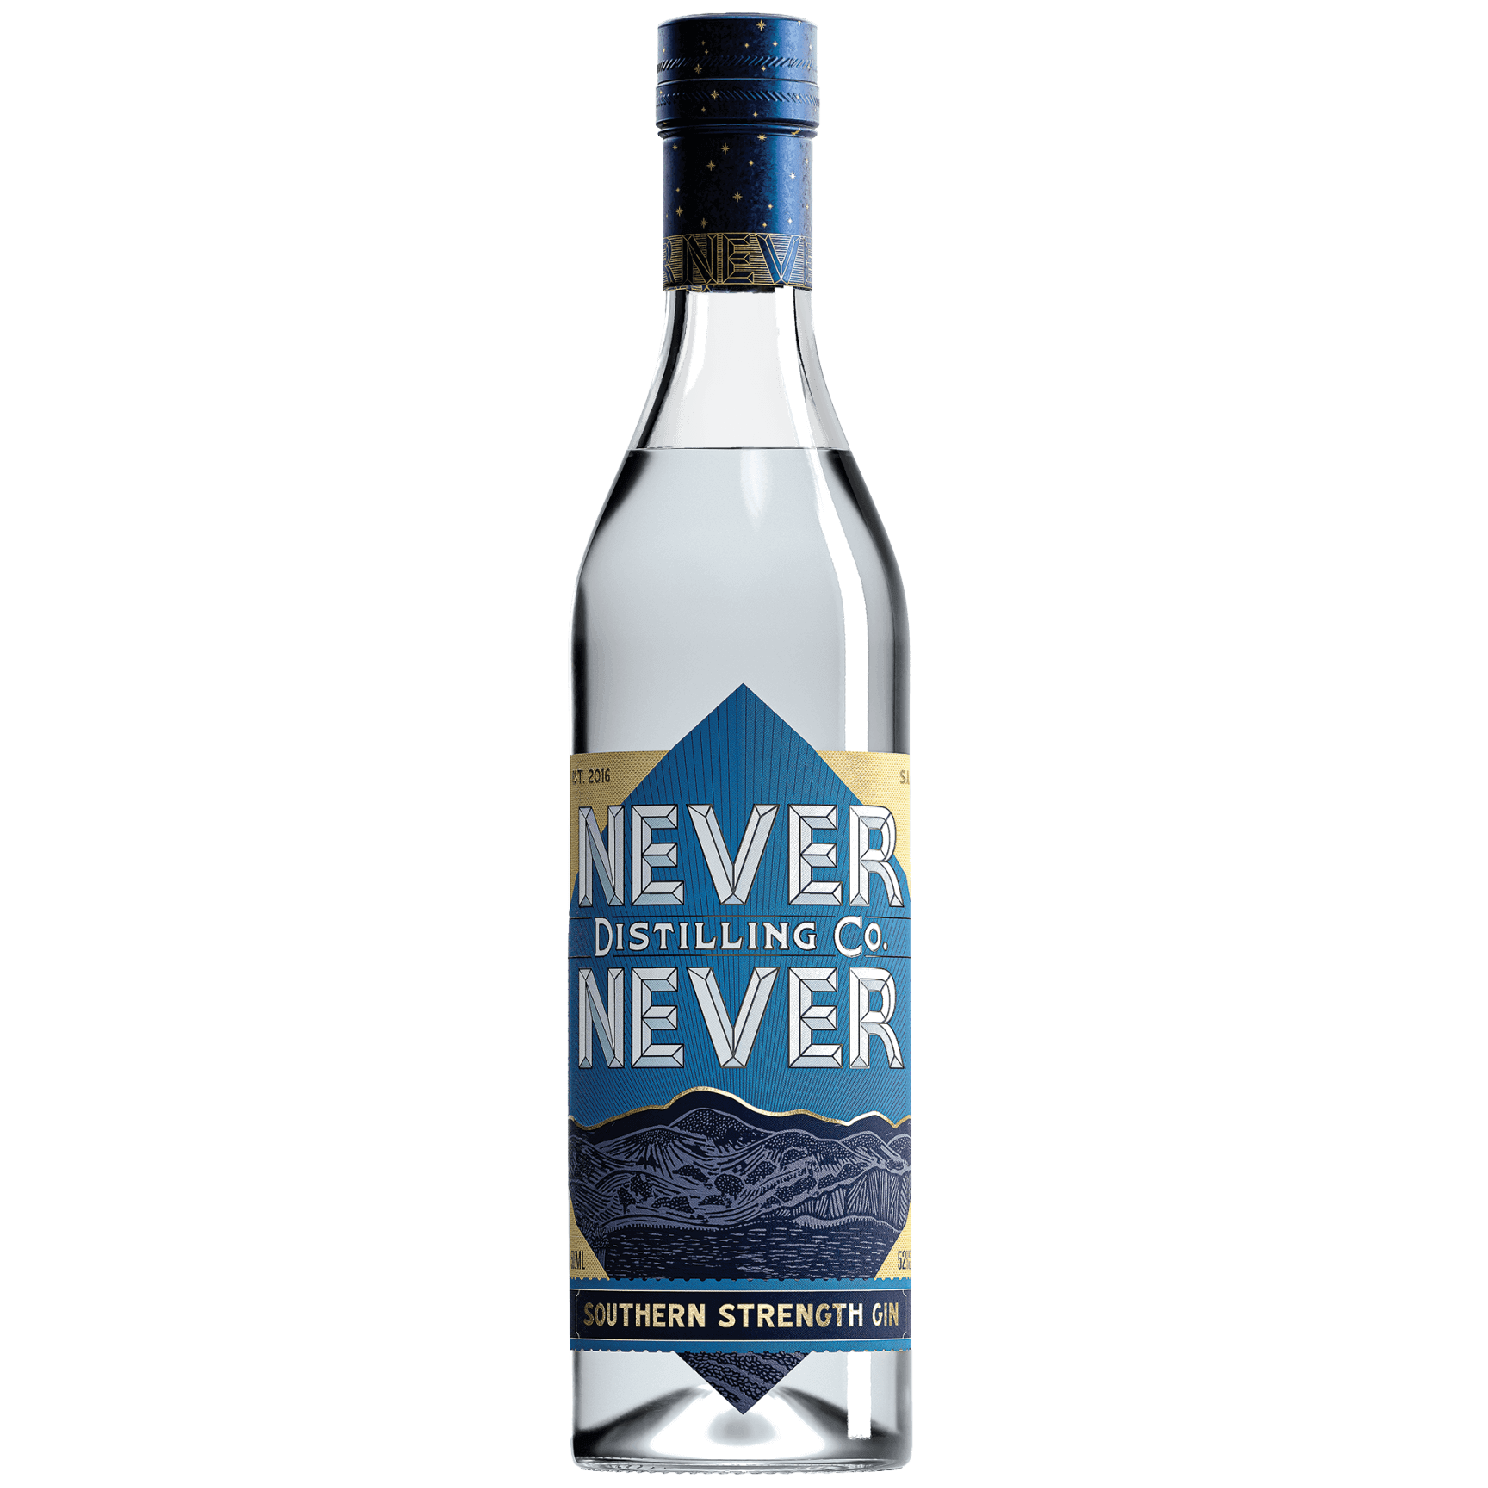 Southern Strength Gin